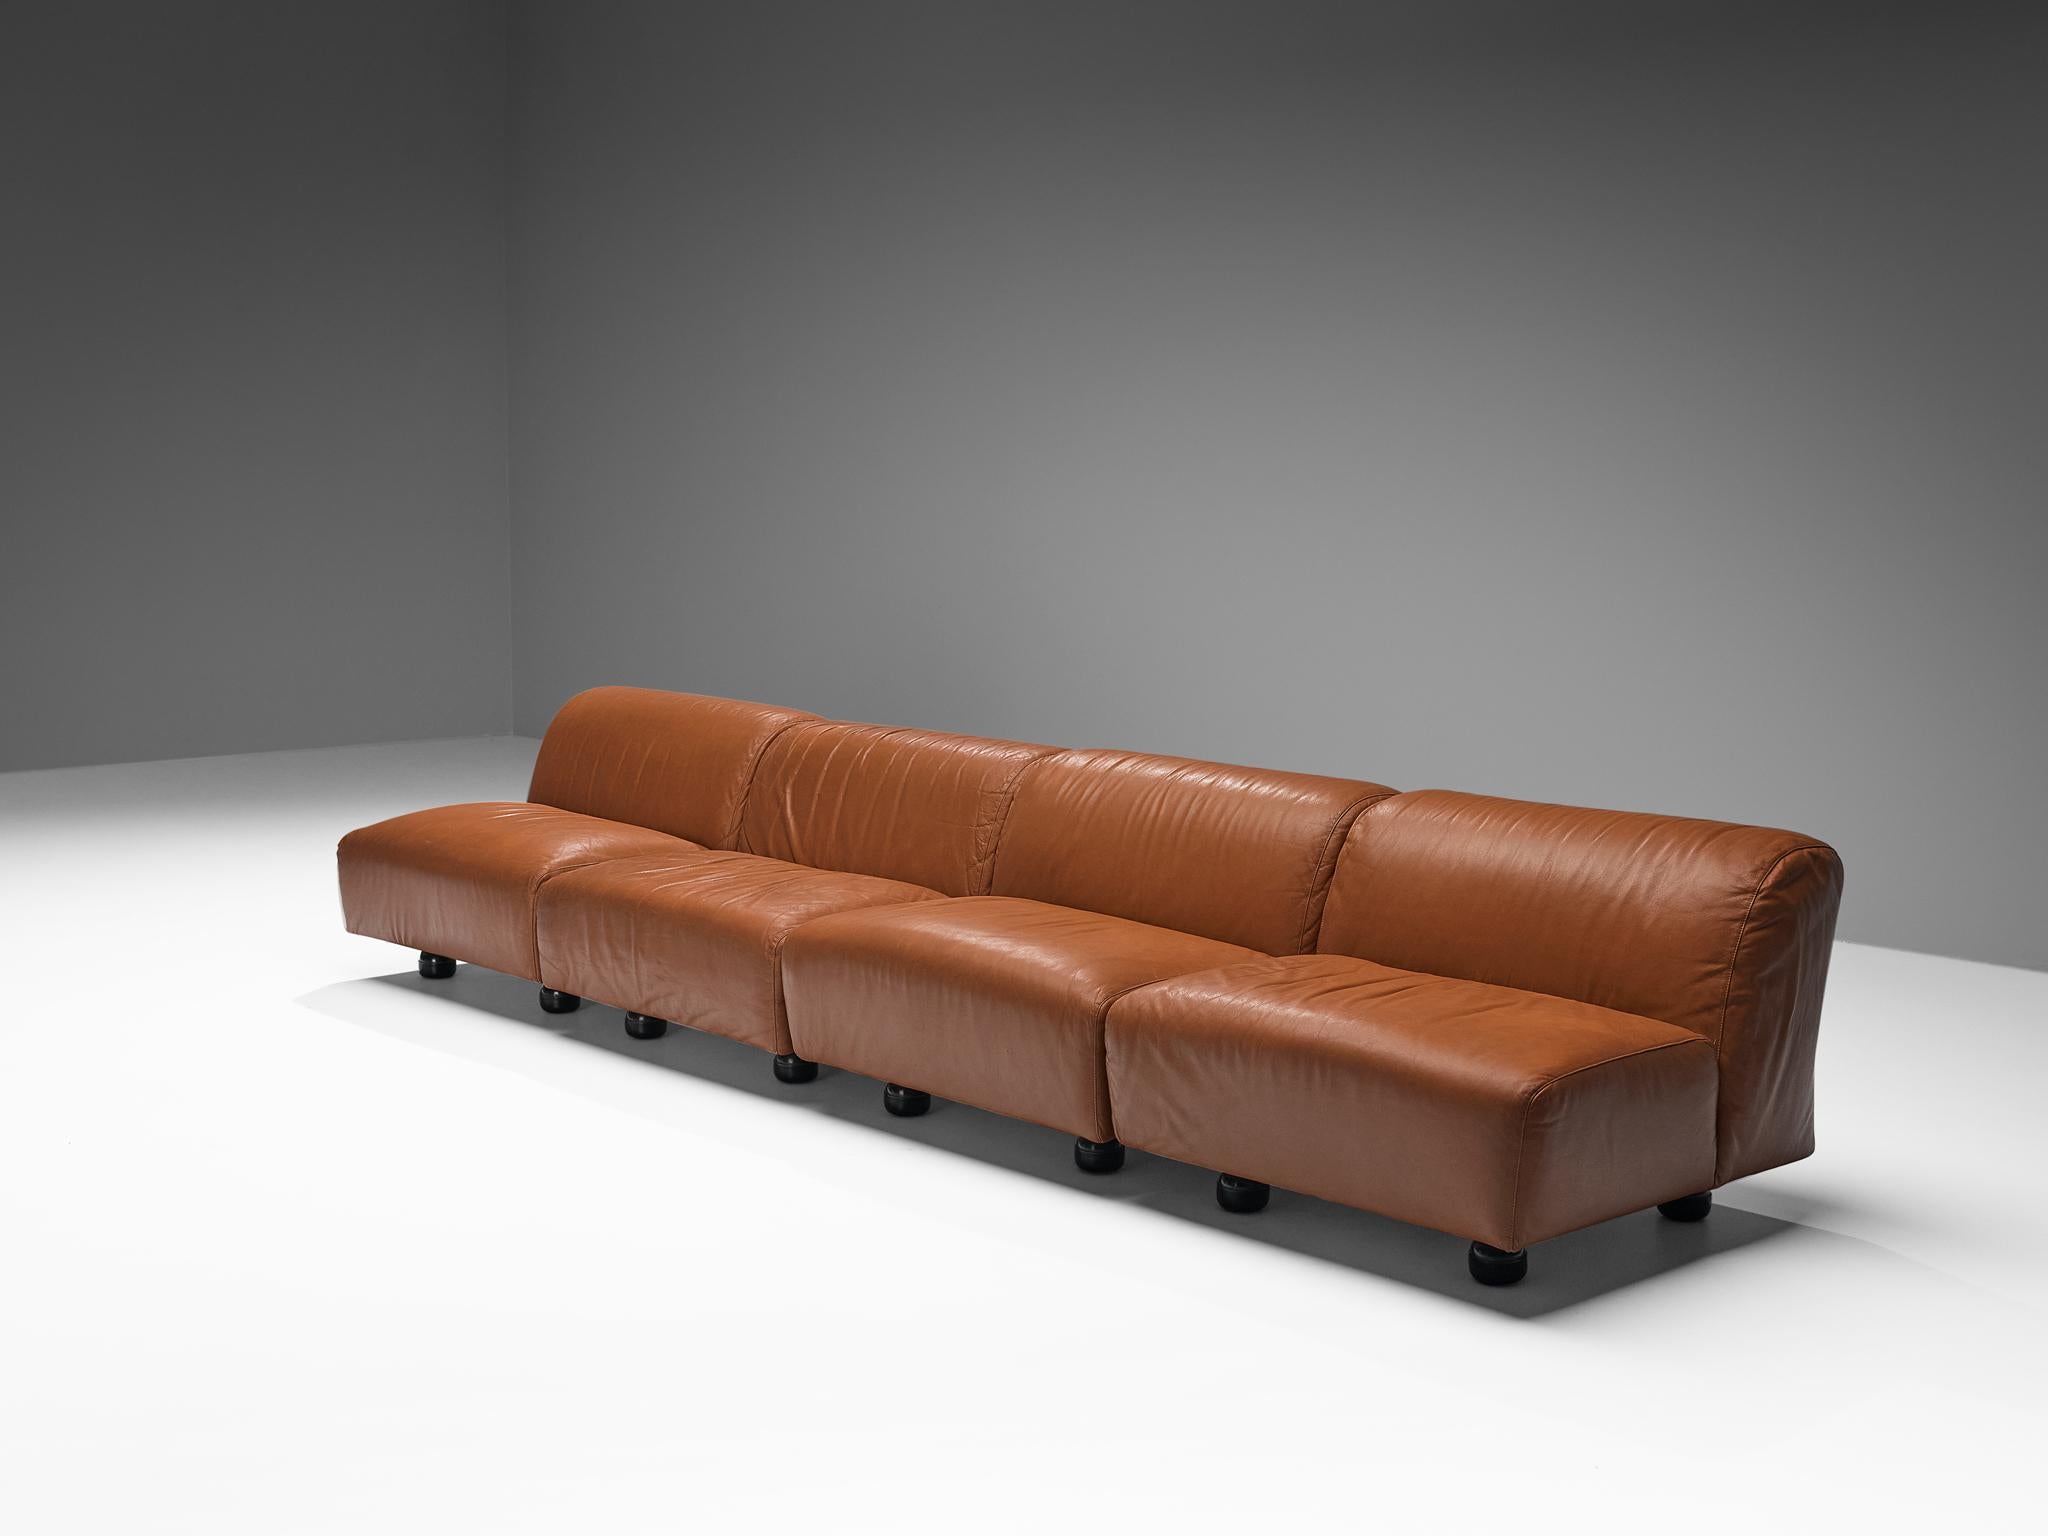 Vico Magistretti for Cassina, ‘Fiandra’ sectional sofa, leather, plastic, Italy, 1975 

This subtle and modest sofa is designed by the Italian designer Vico Magistretti (1920-2006) for Cassina and contains four modular elements. This means that it